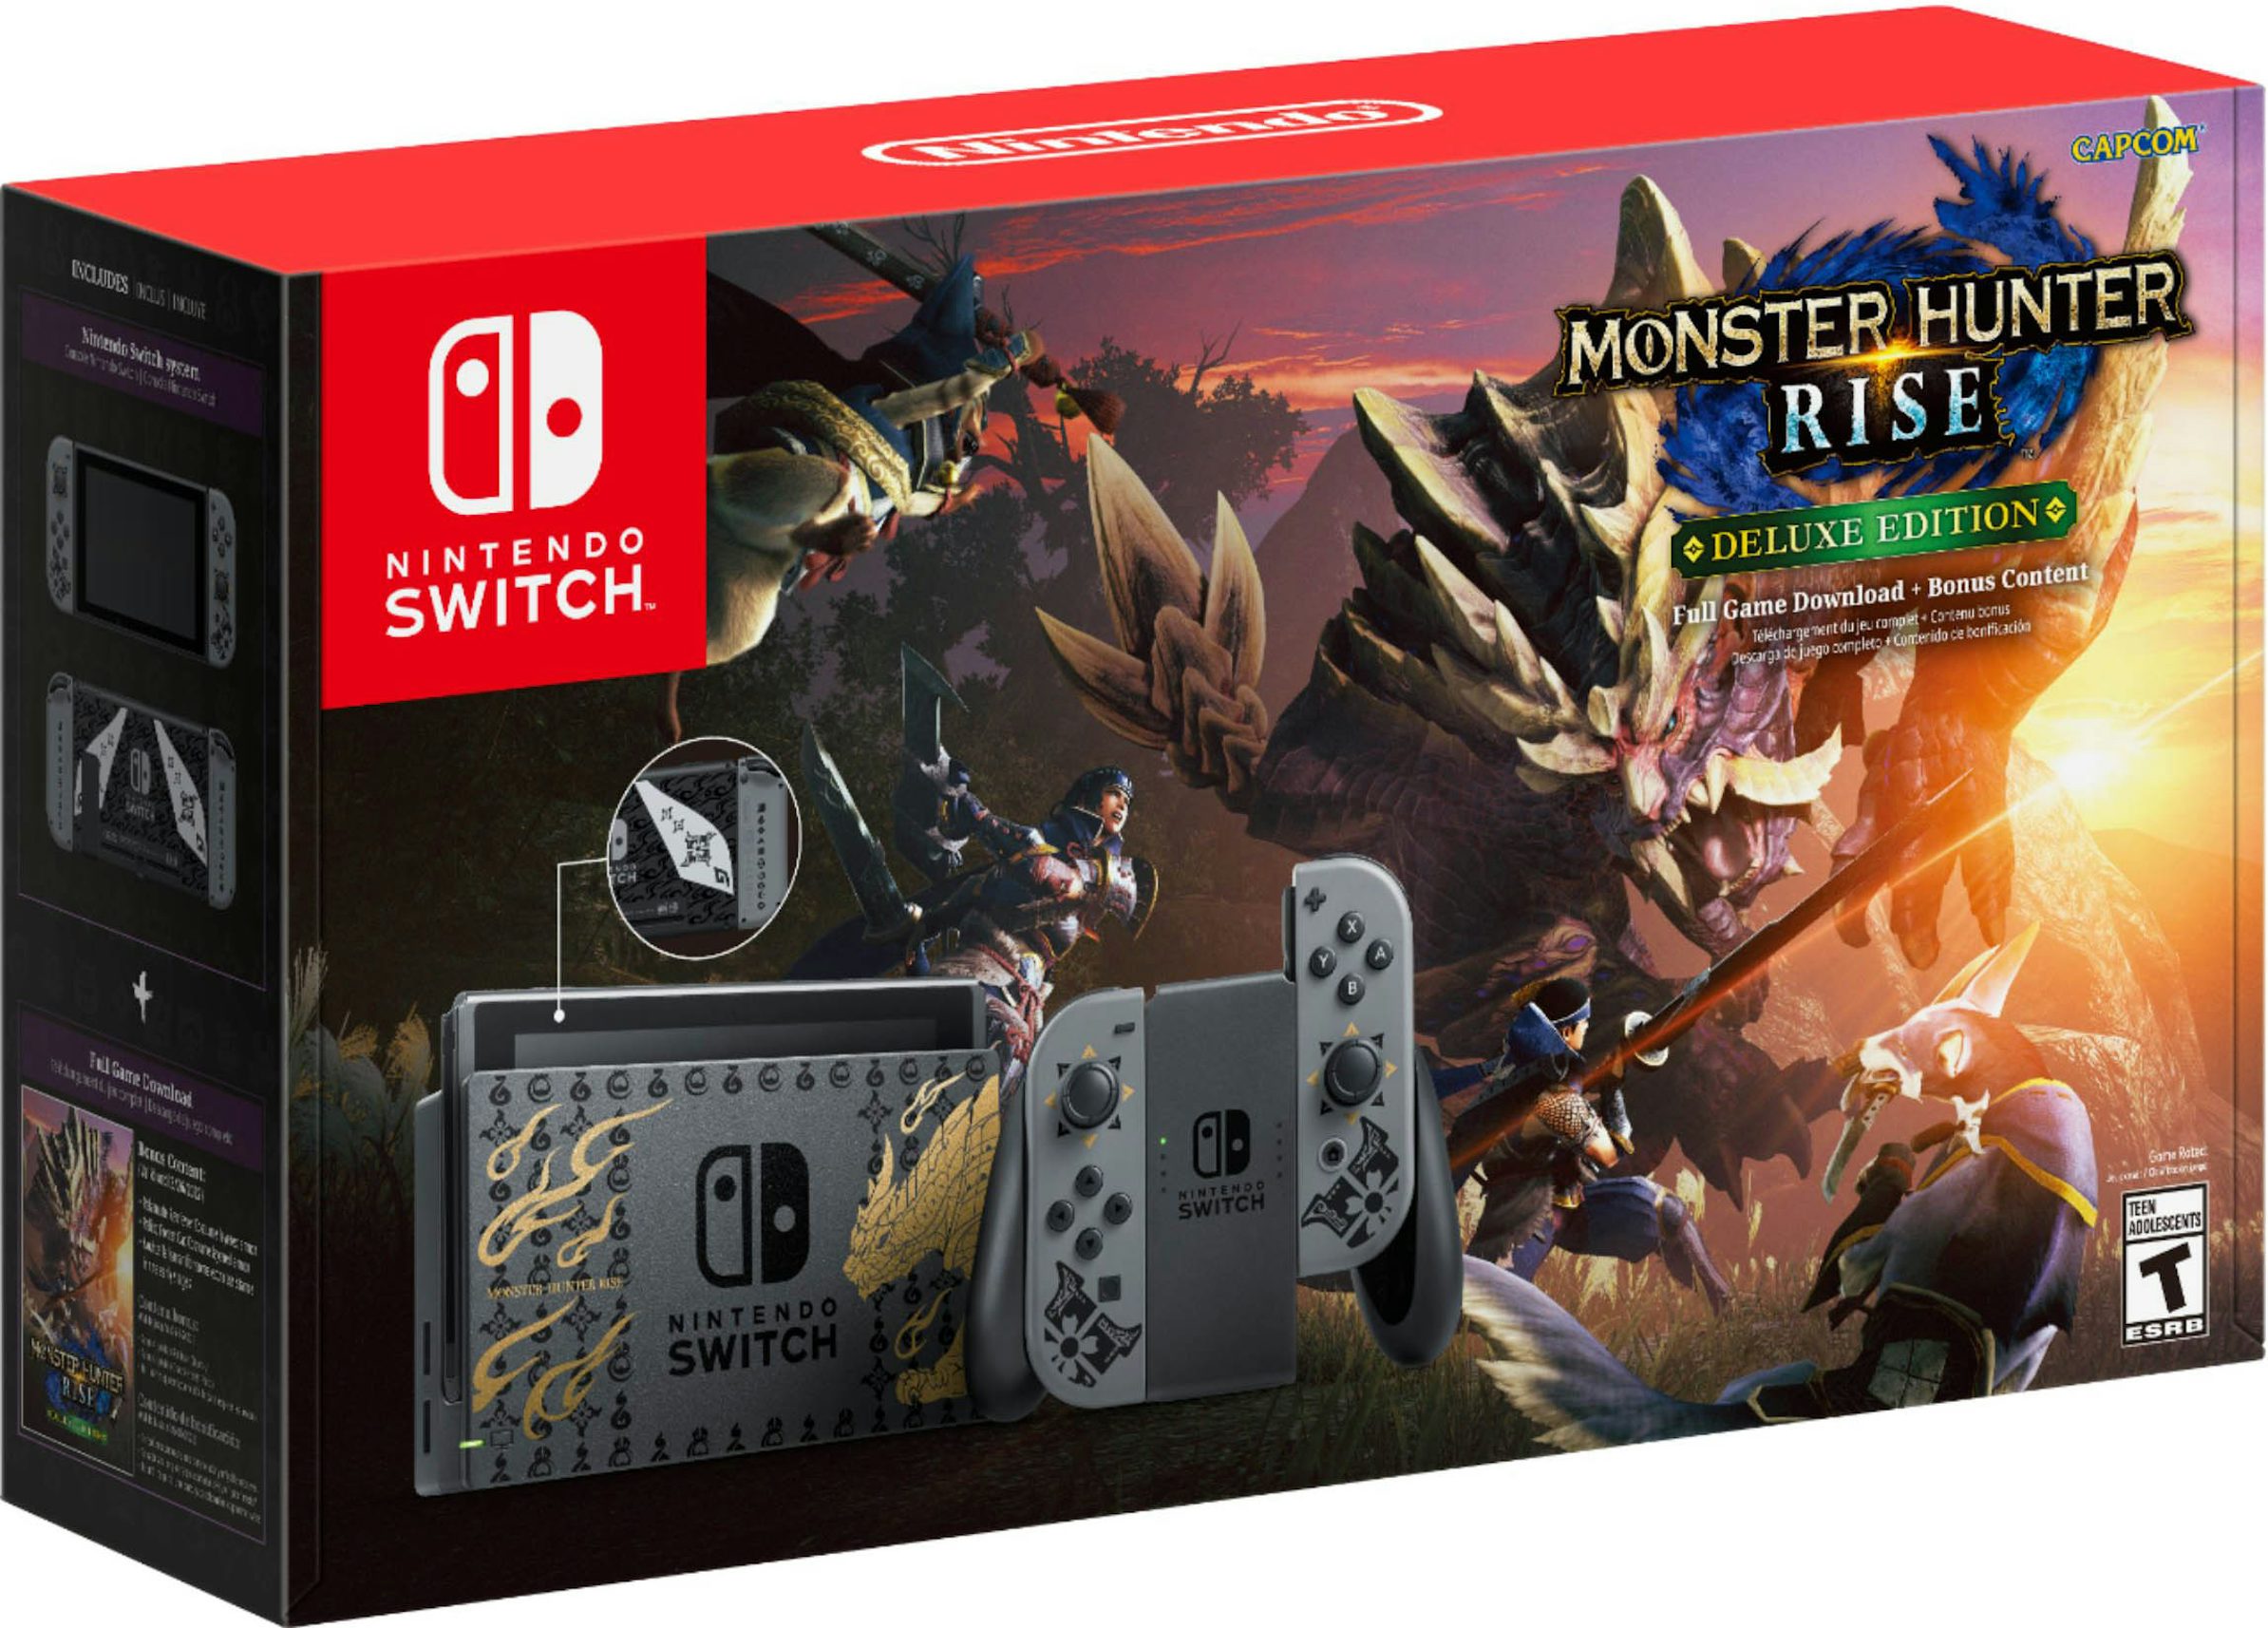 Nintendo Switch Monster US Grey Edition Rise HADSKGALG System Deluxe - Hunter